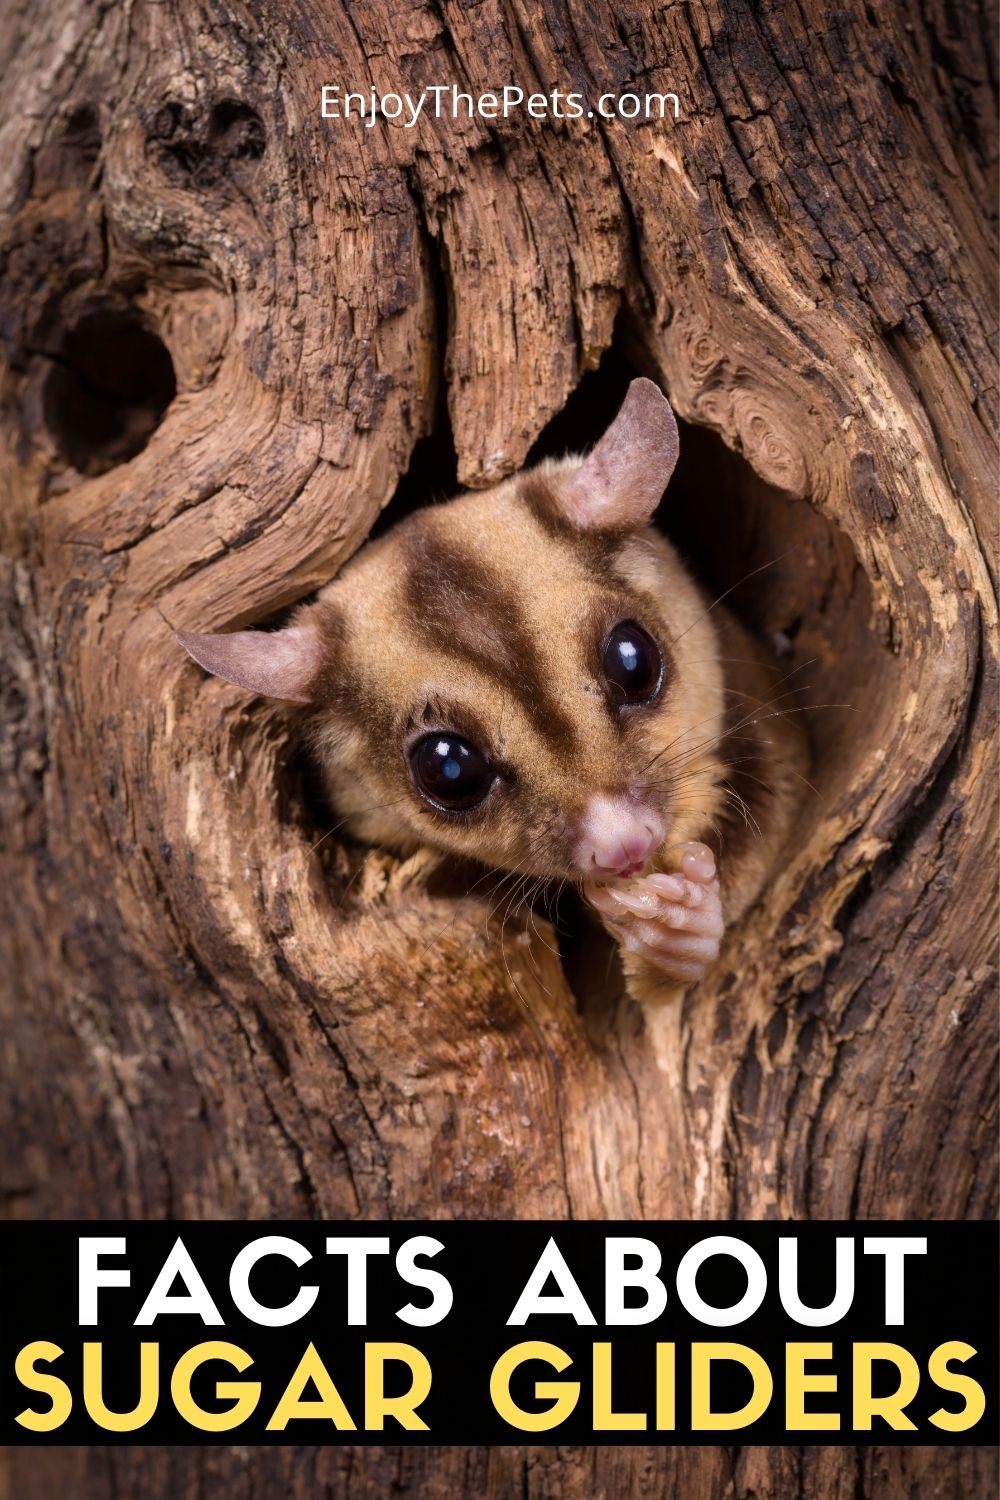 FACTS ABOUT SUGAR GLIDERS